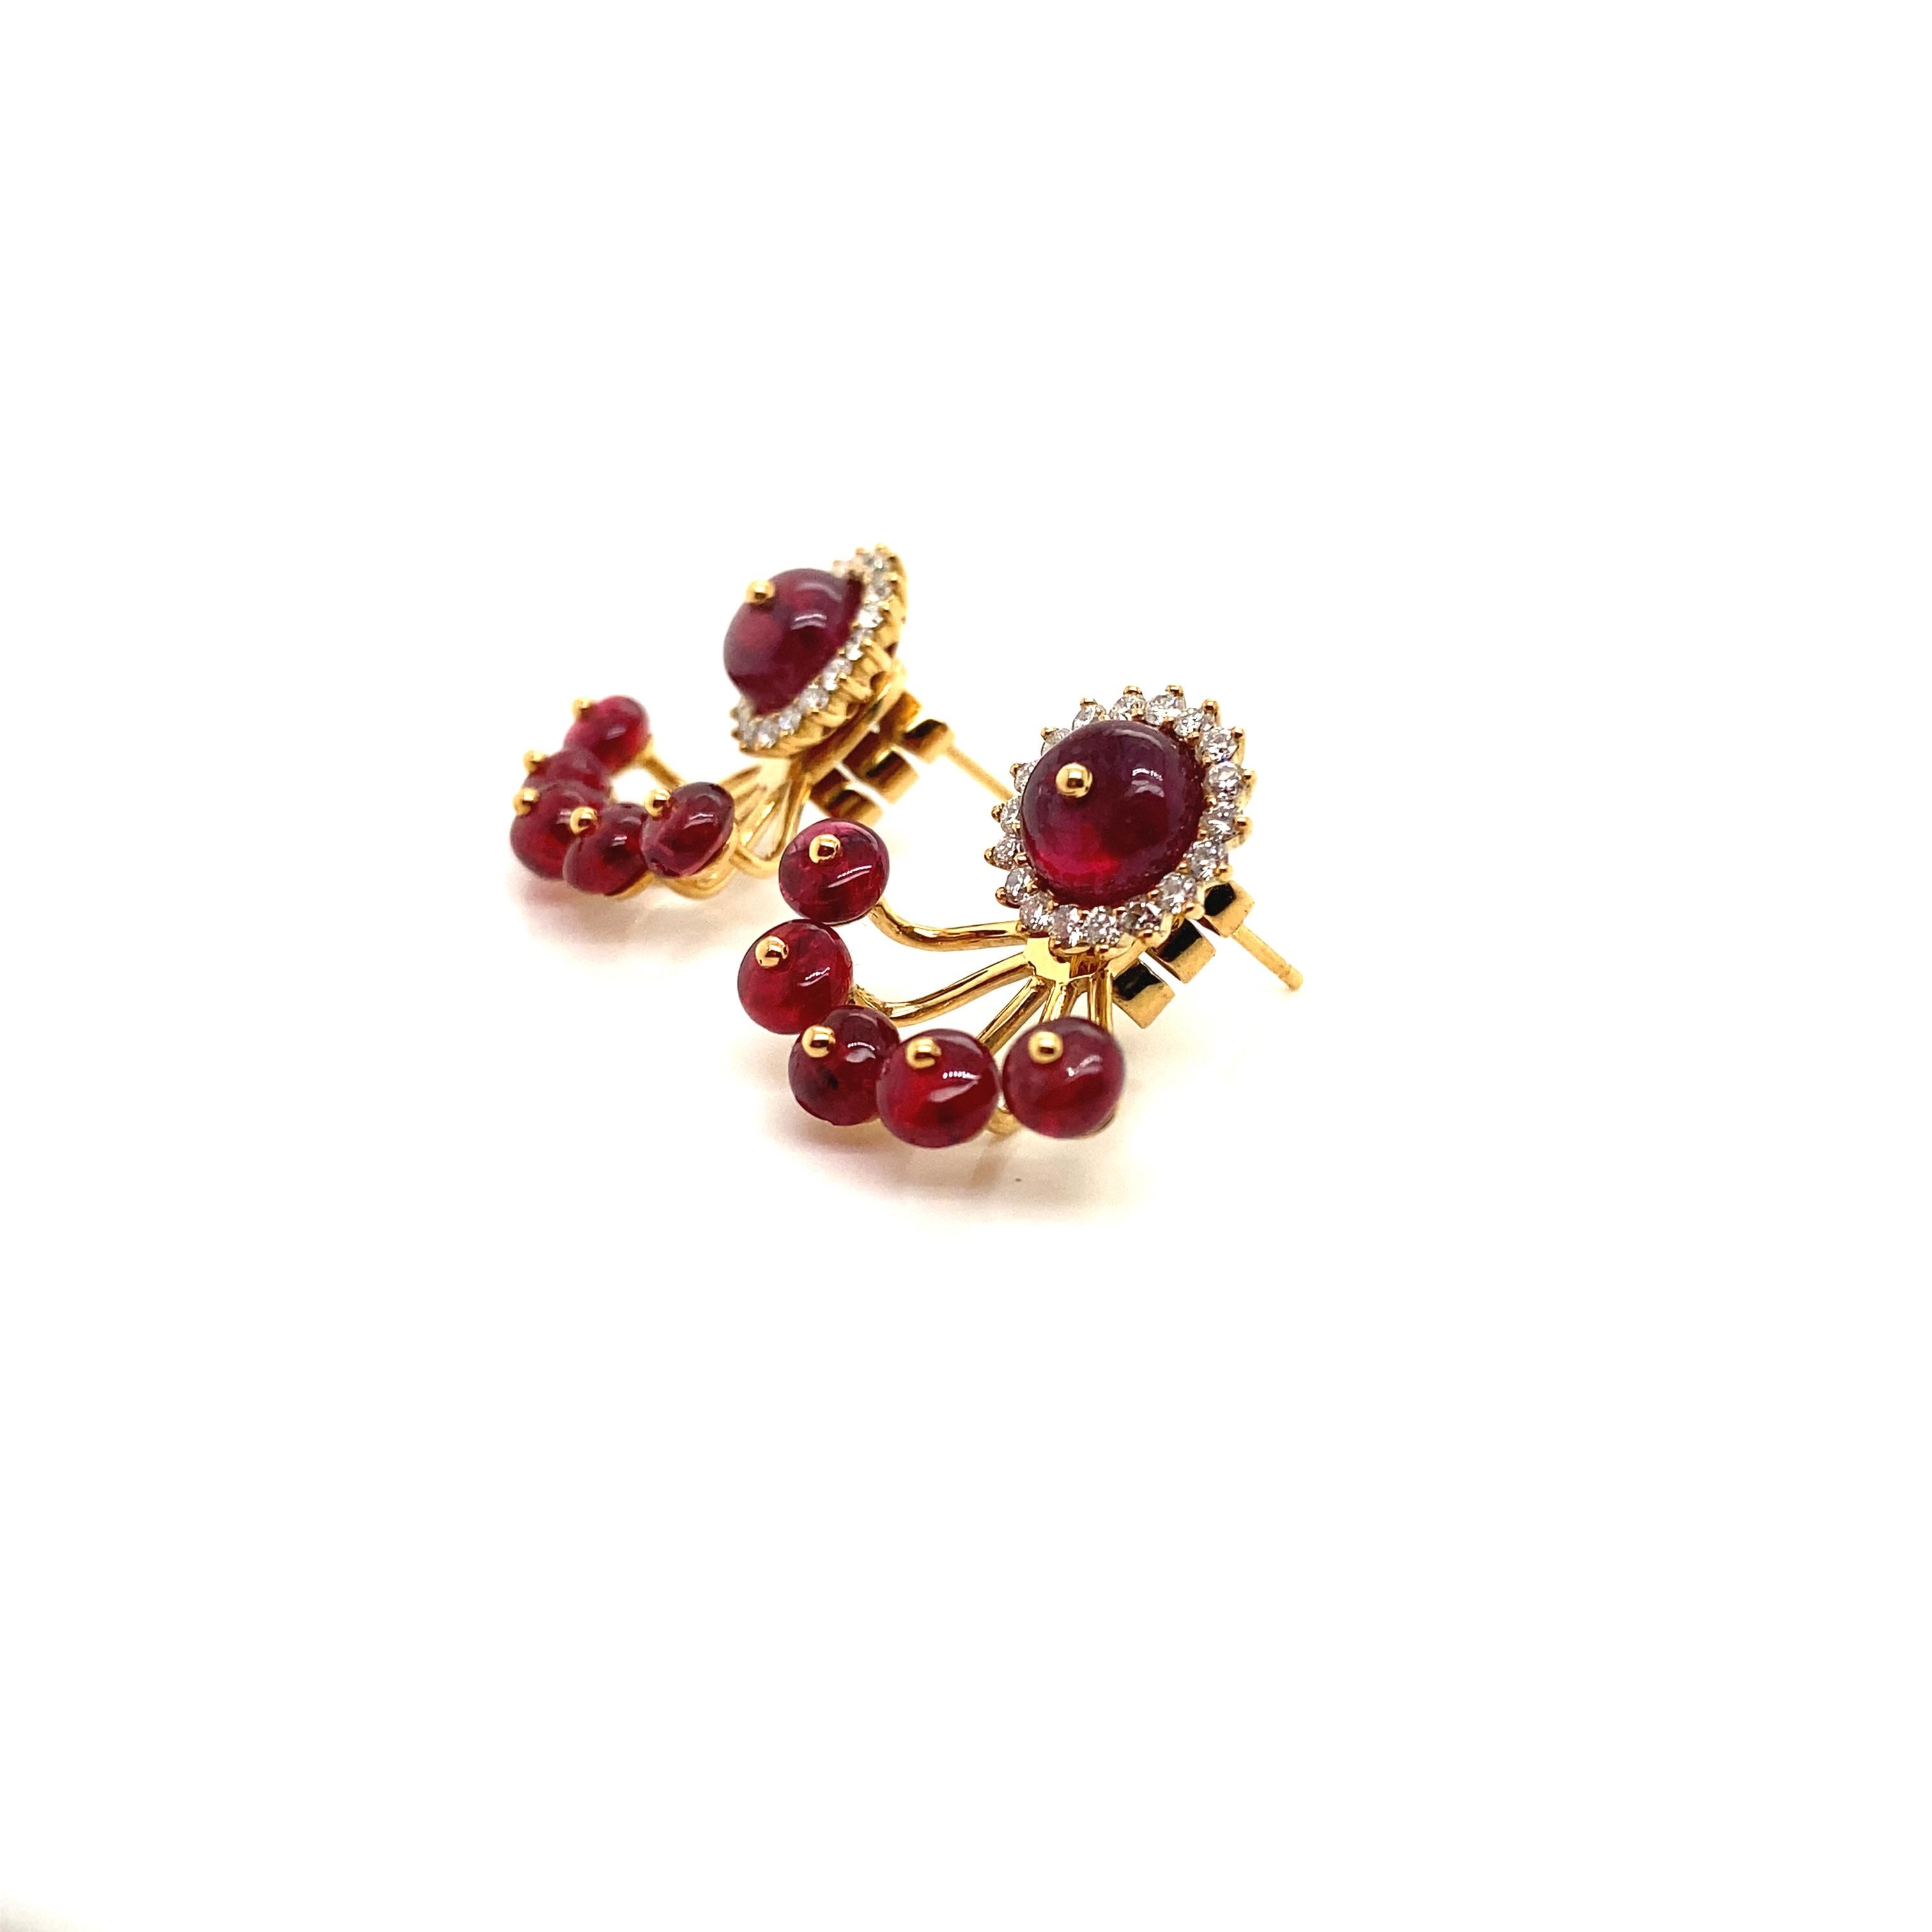 12.98 Carat Natural Red Spinel Beads and Diamond Gold Earrings For Sale 5